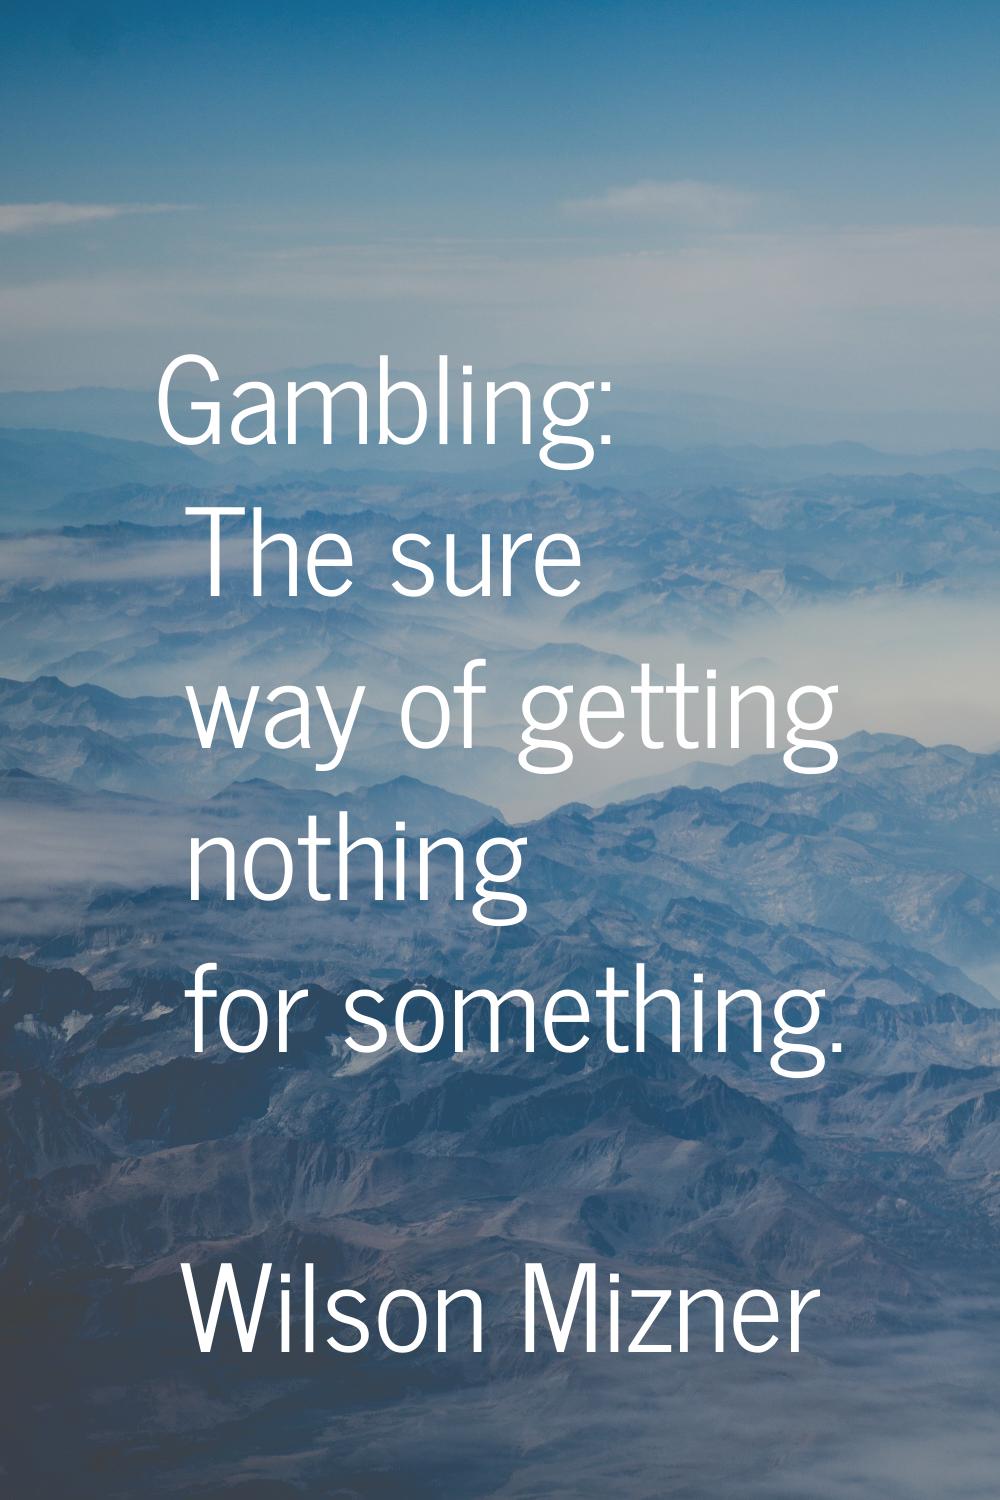 Gambling: The sure way of getting nothing for something.